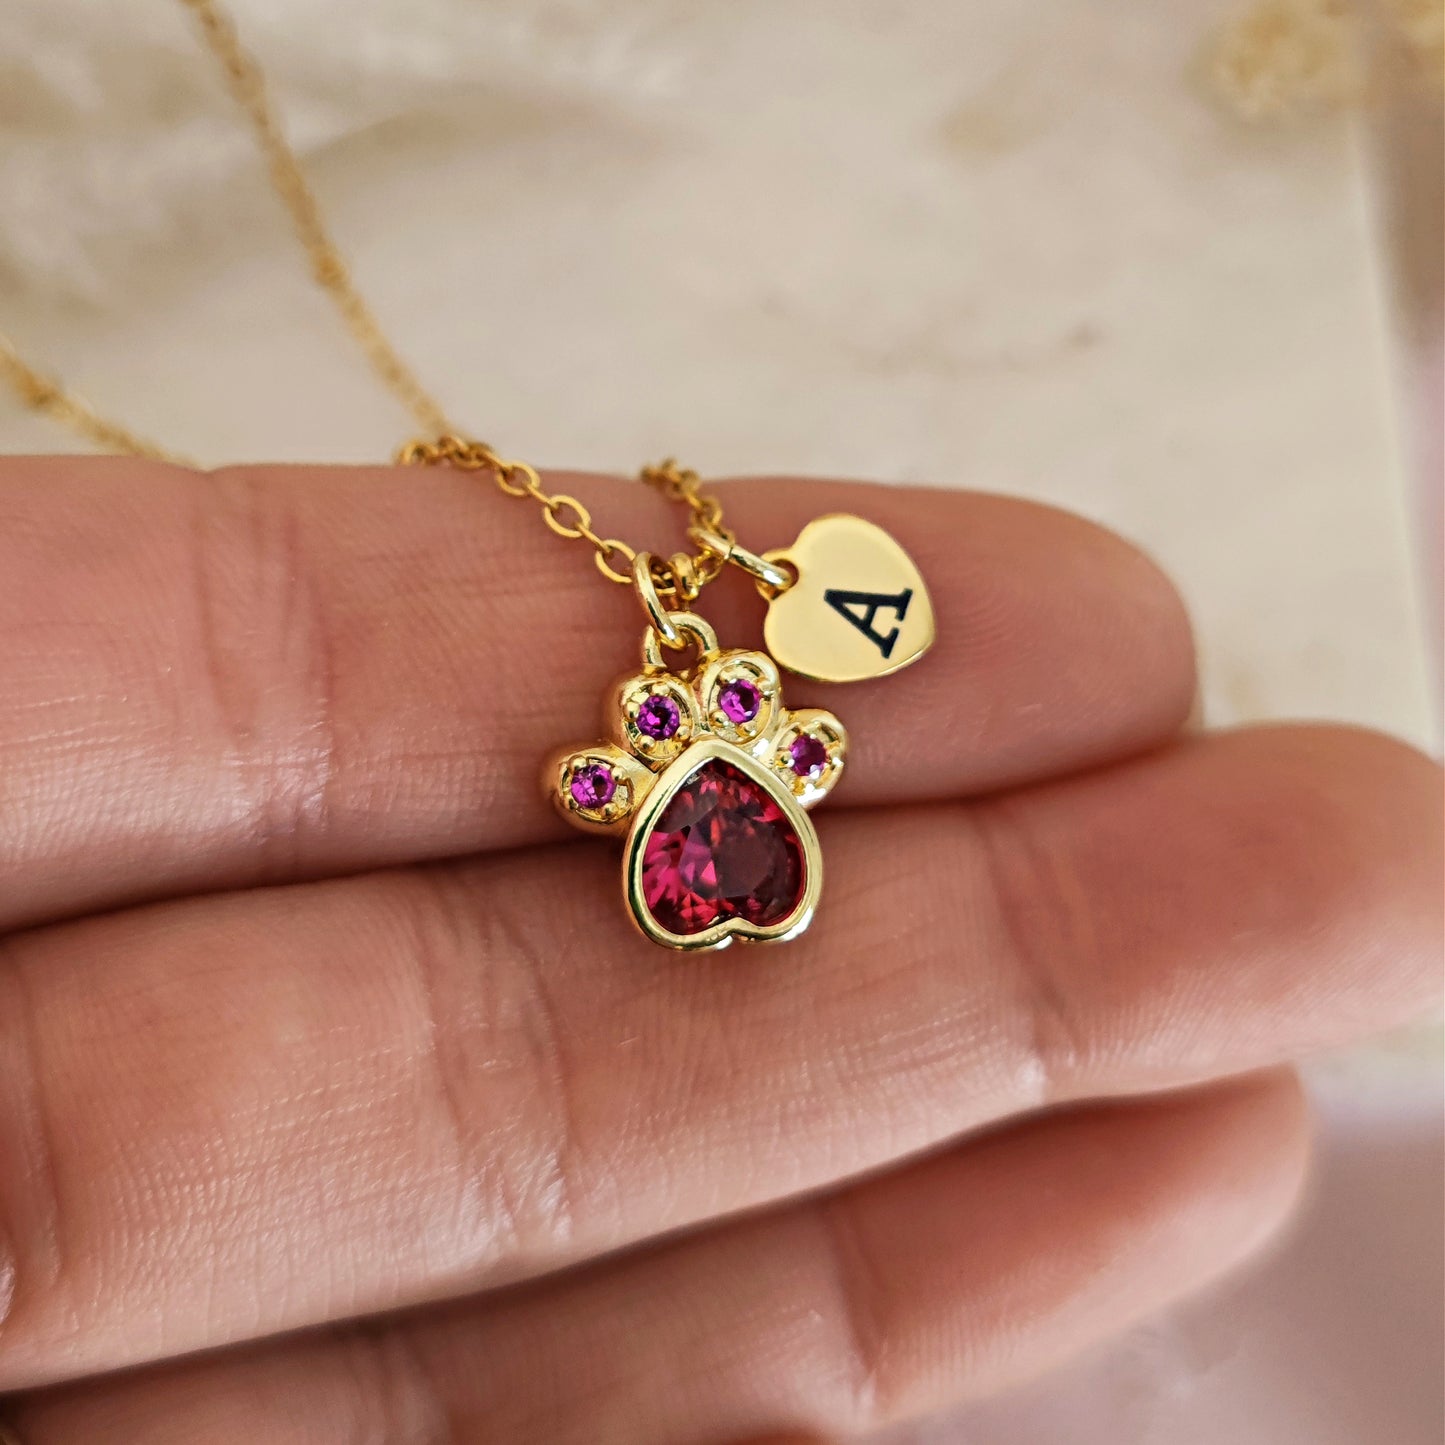 "Paw-lentine" necklace with heart-shaped paw and initial